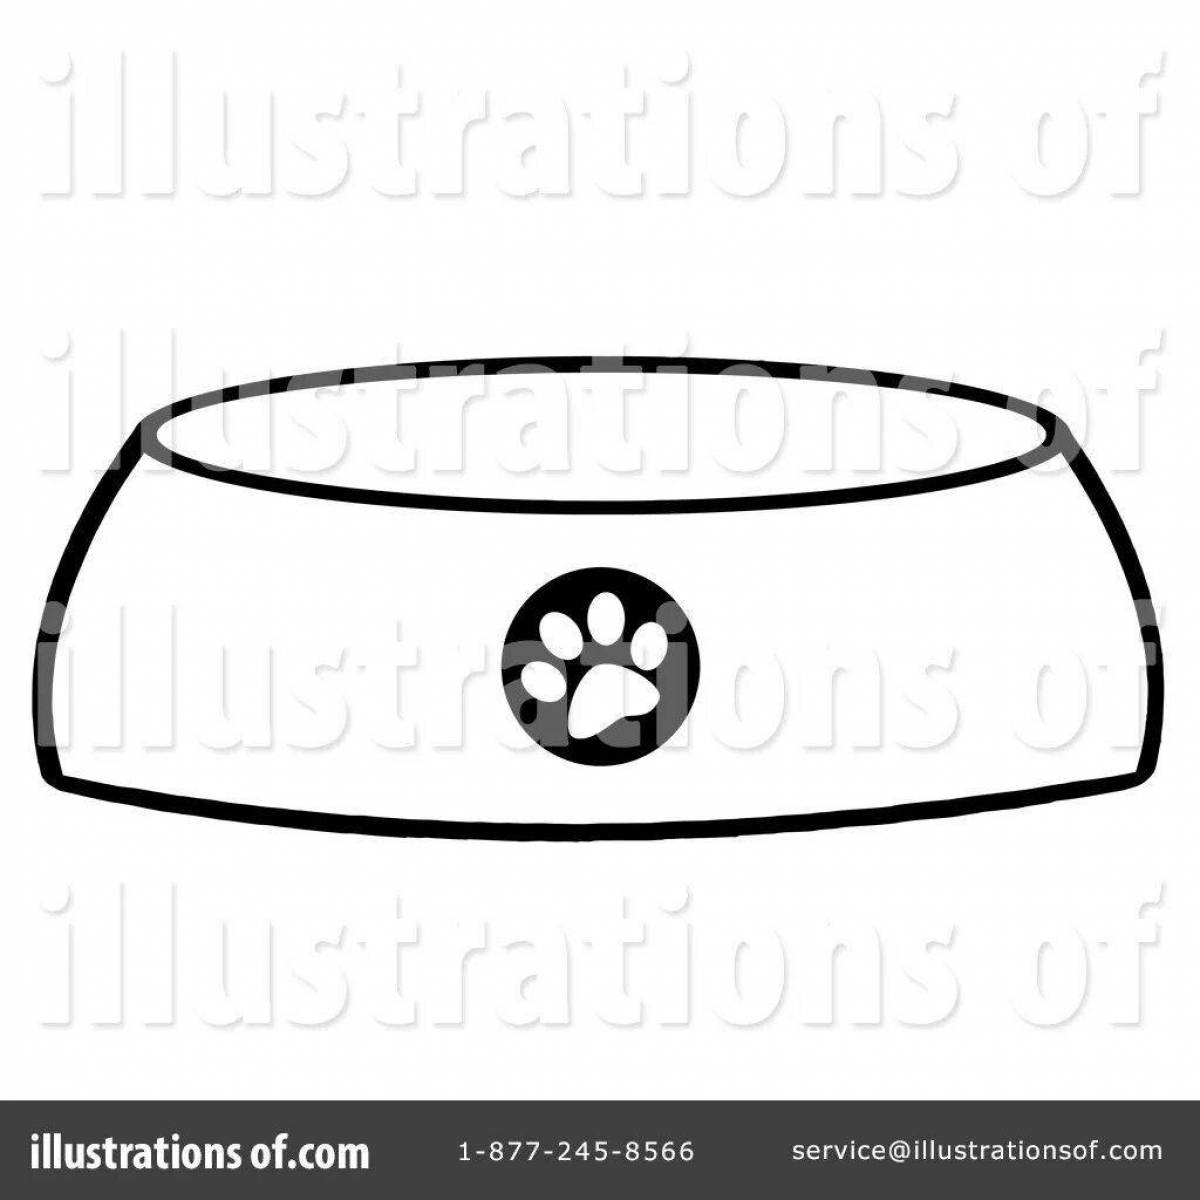 Adorable dog bowl coloring page